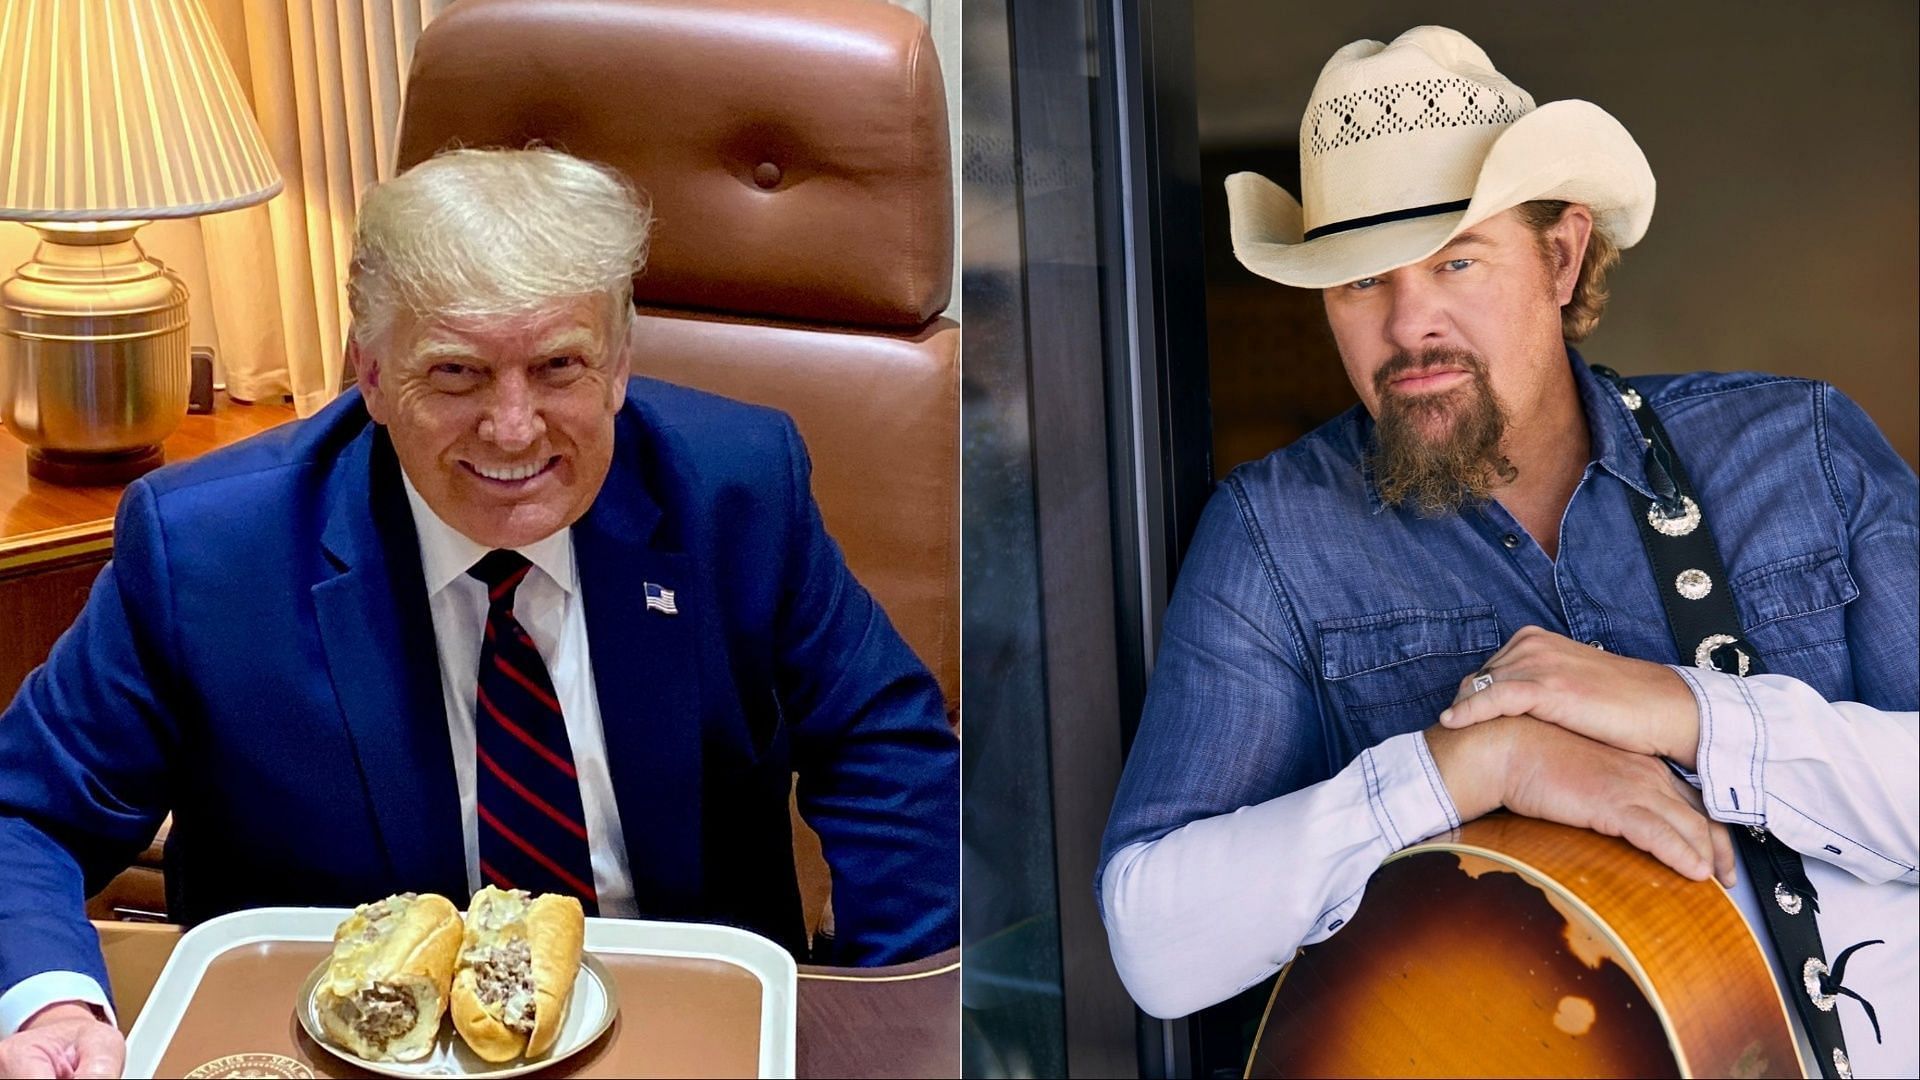 Toby Keith has been claimed to be an alleged Trump supporter (Image via Facebook / Donald J. Trump / Toby Keith)